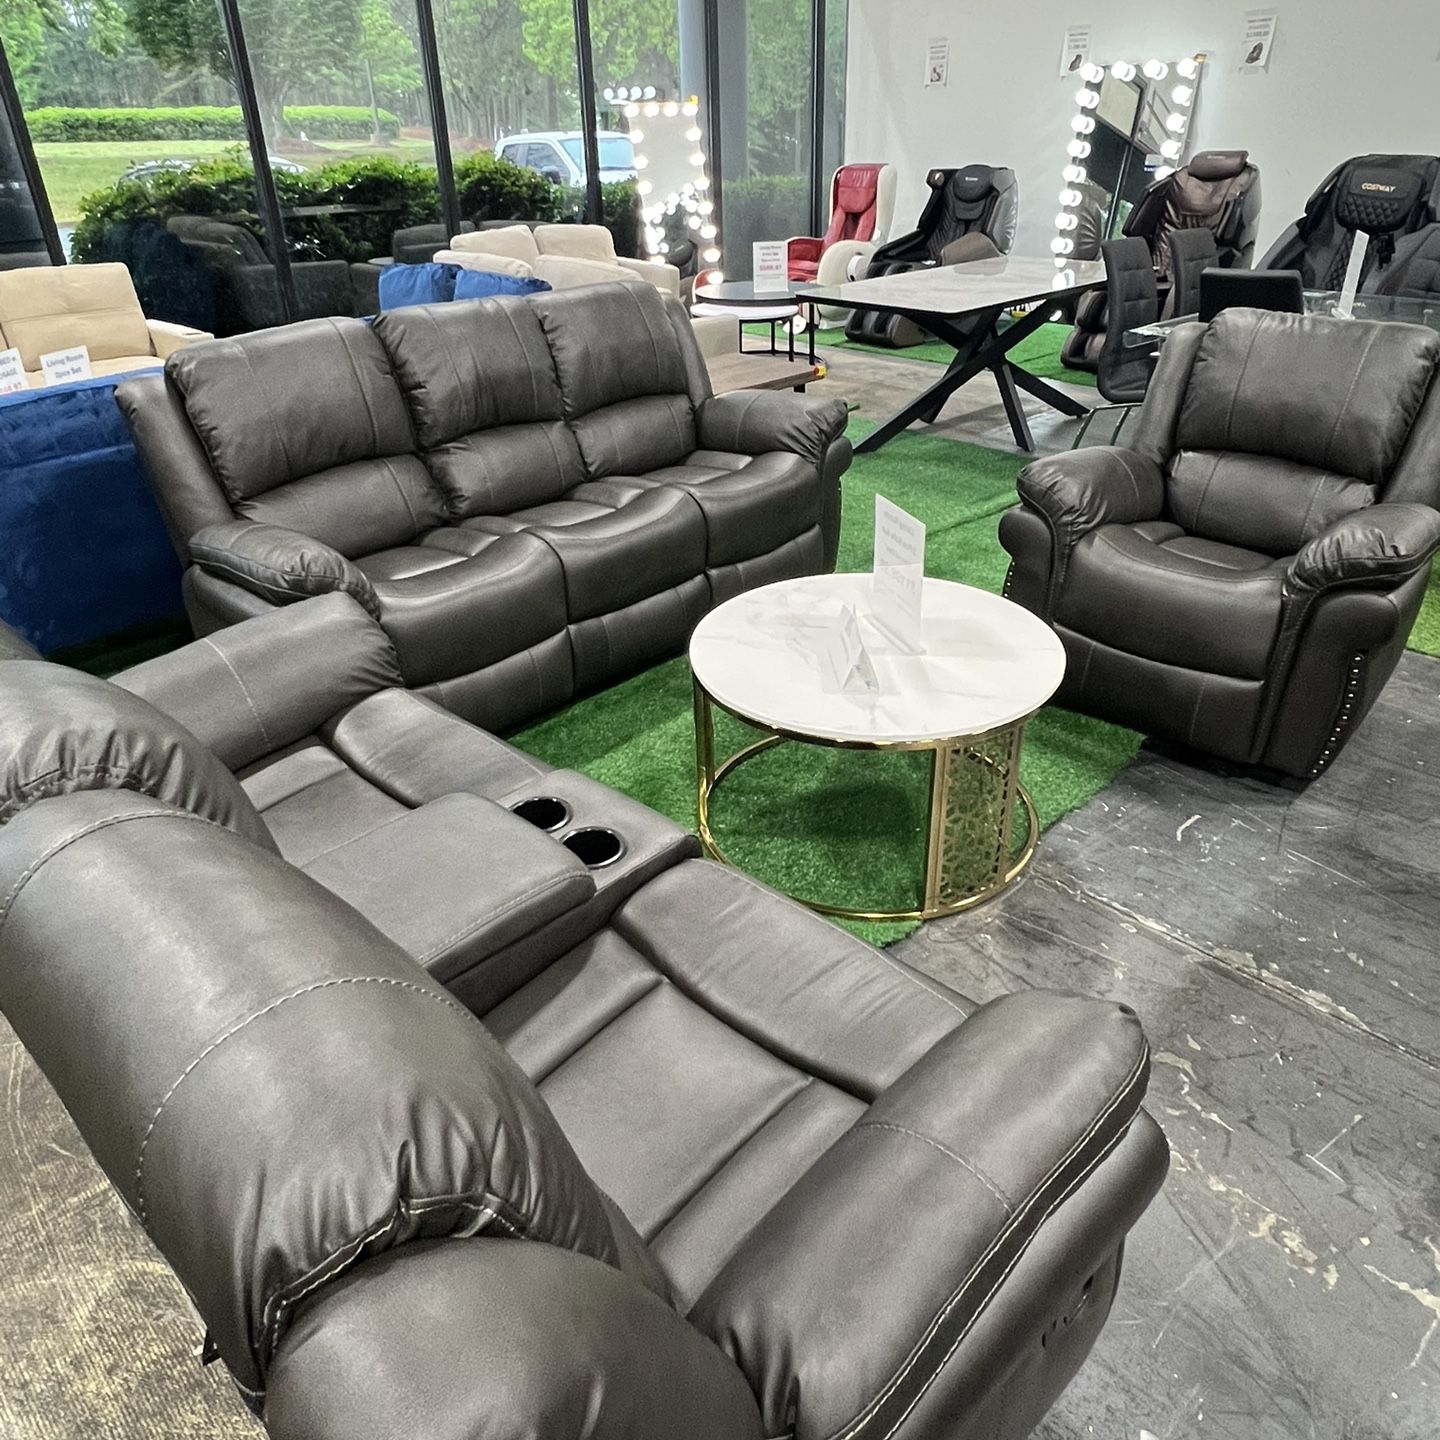 Recliner Couch, Loveseat And Rocking Chair 3 PCs Set